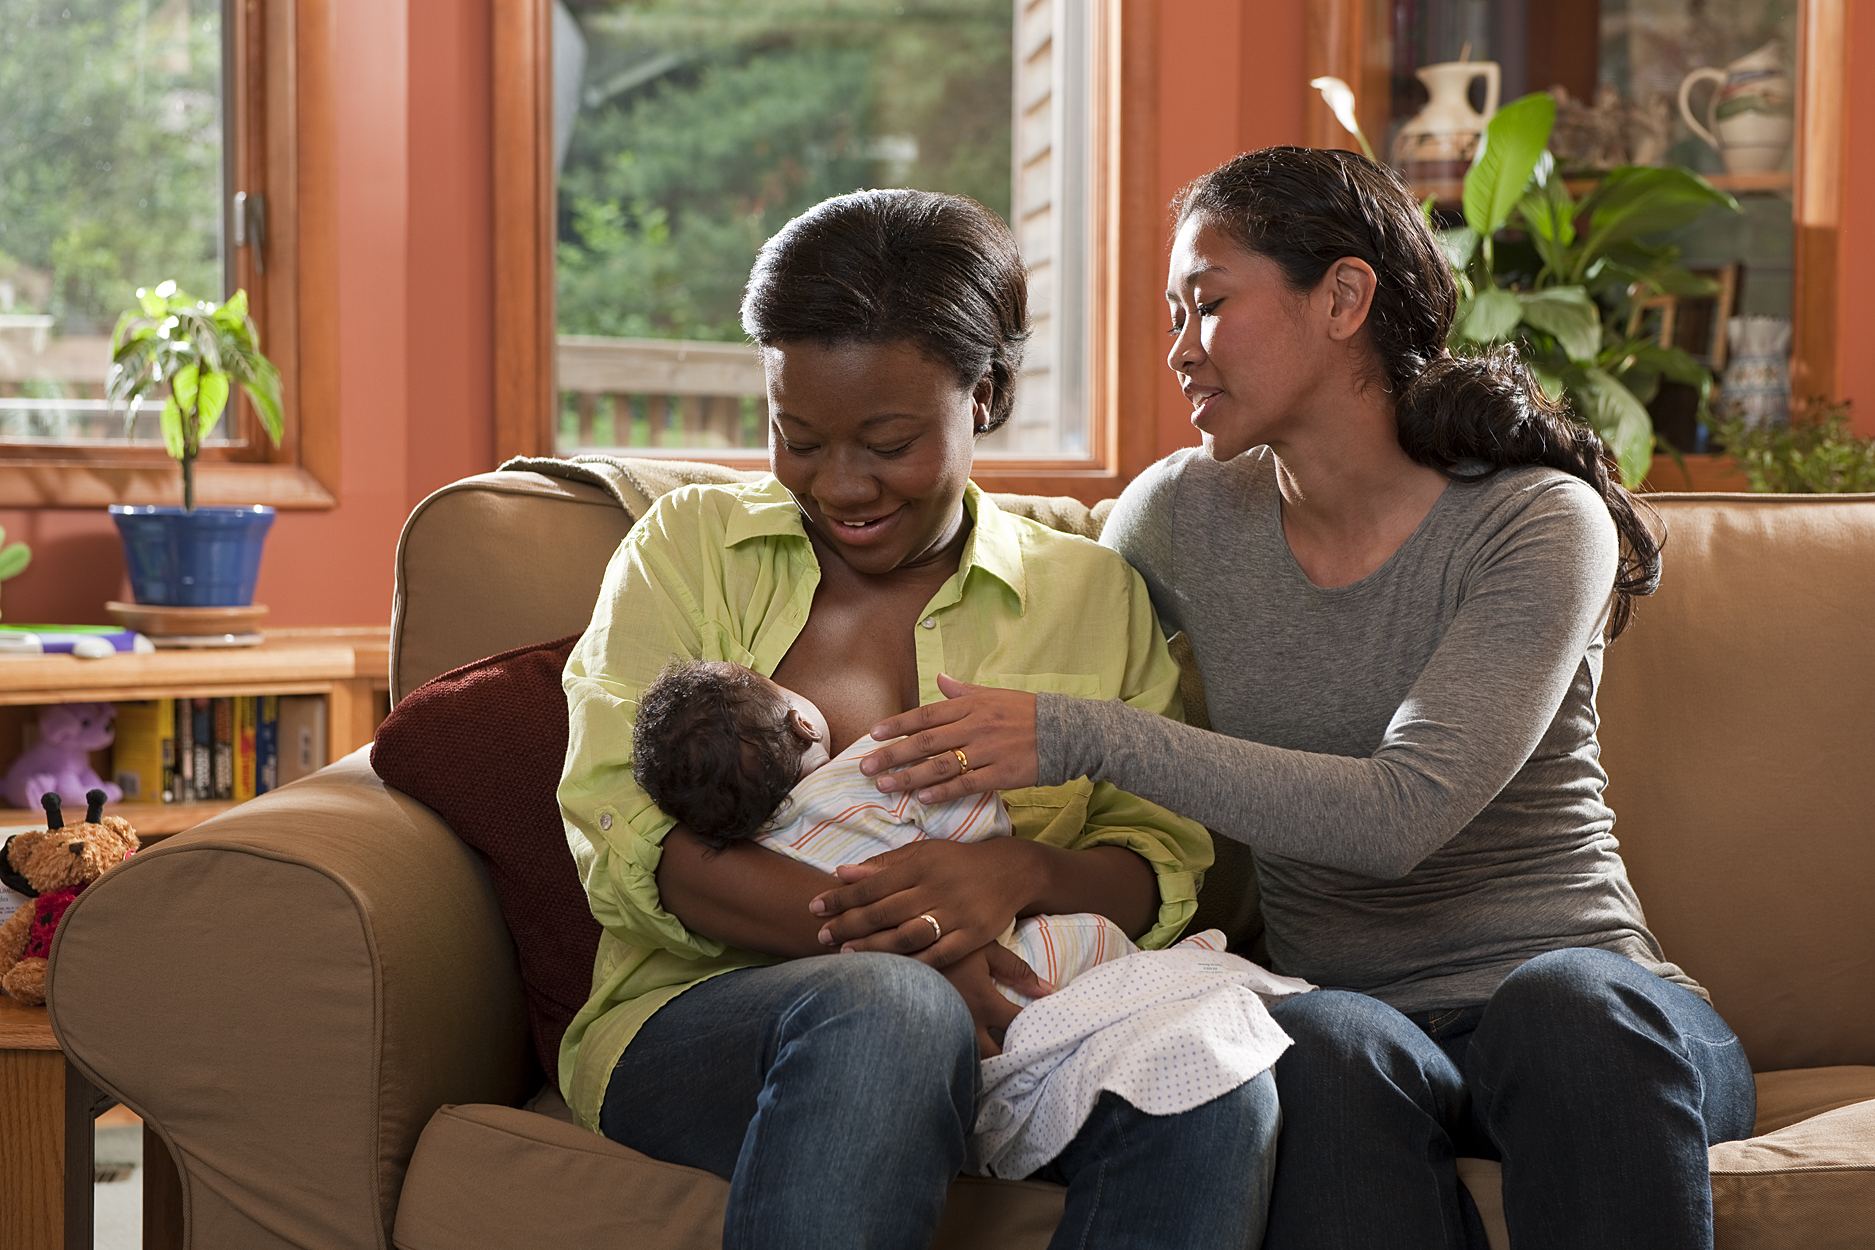 Breastfeeding counselor helping new mother breastfeed 